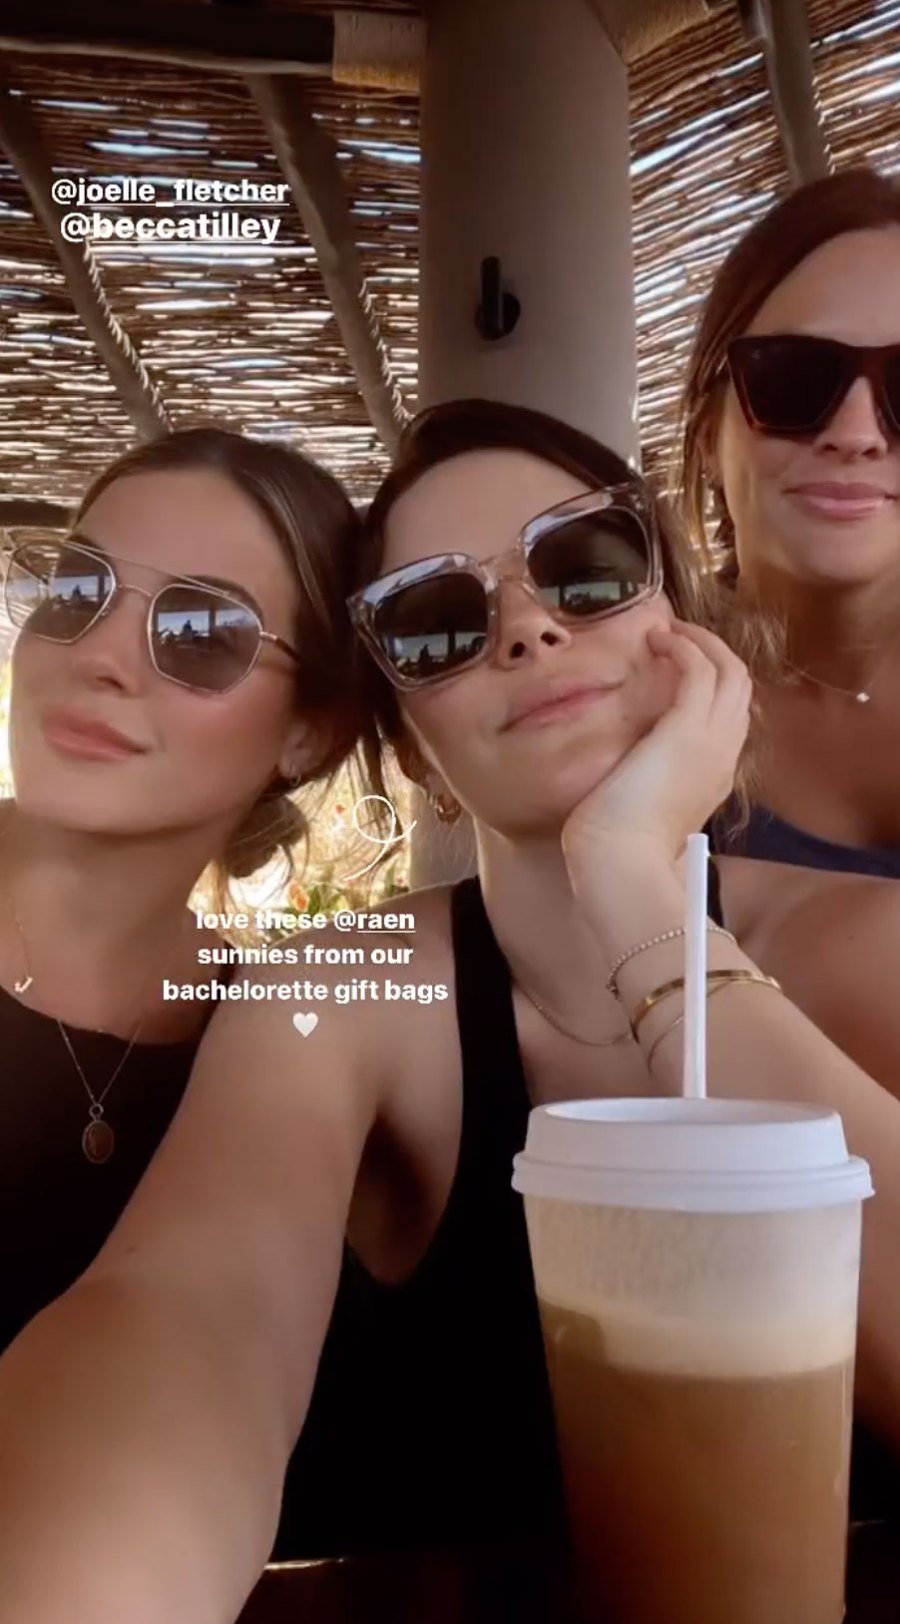 Bachelor Nations JoJo Fletcher Jets Off to Cabo for Her Bachelorette Party With Becca Tilley and More Pals